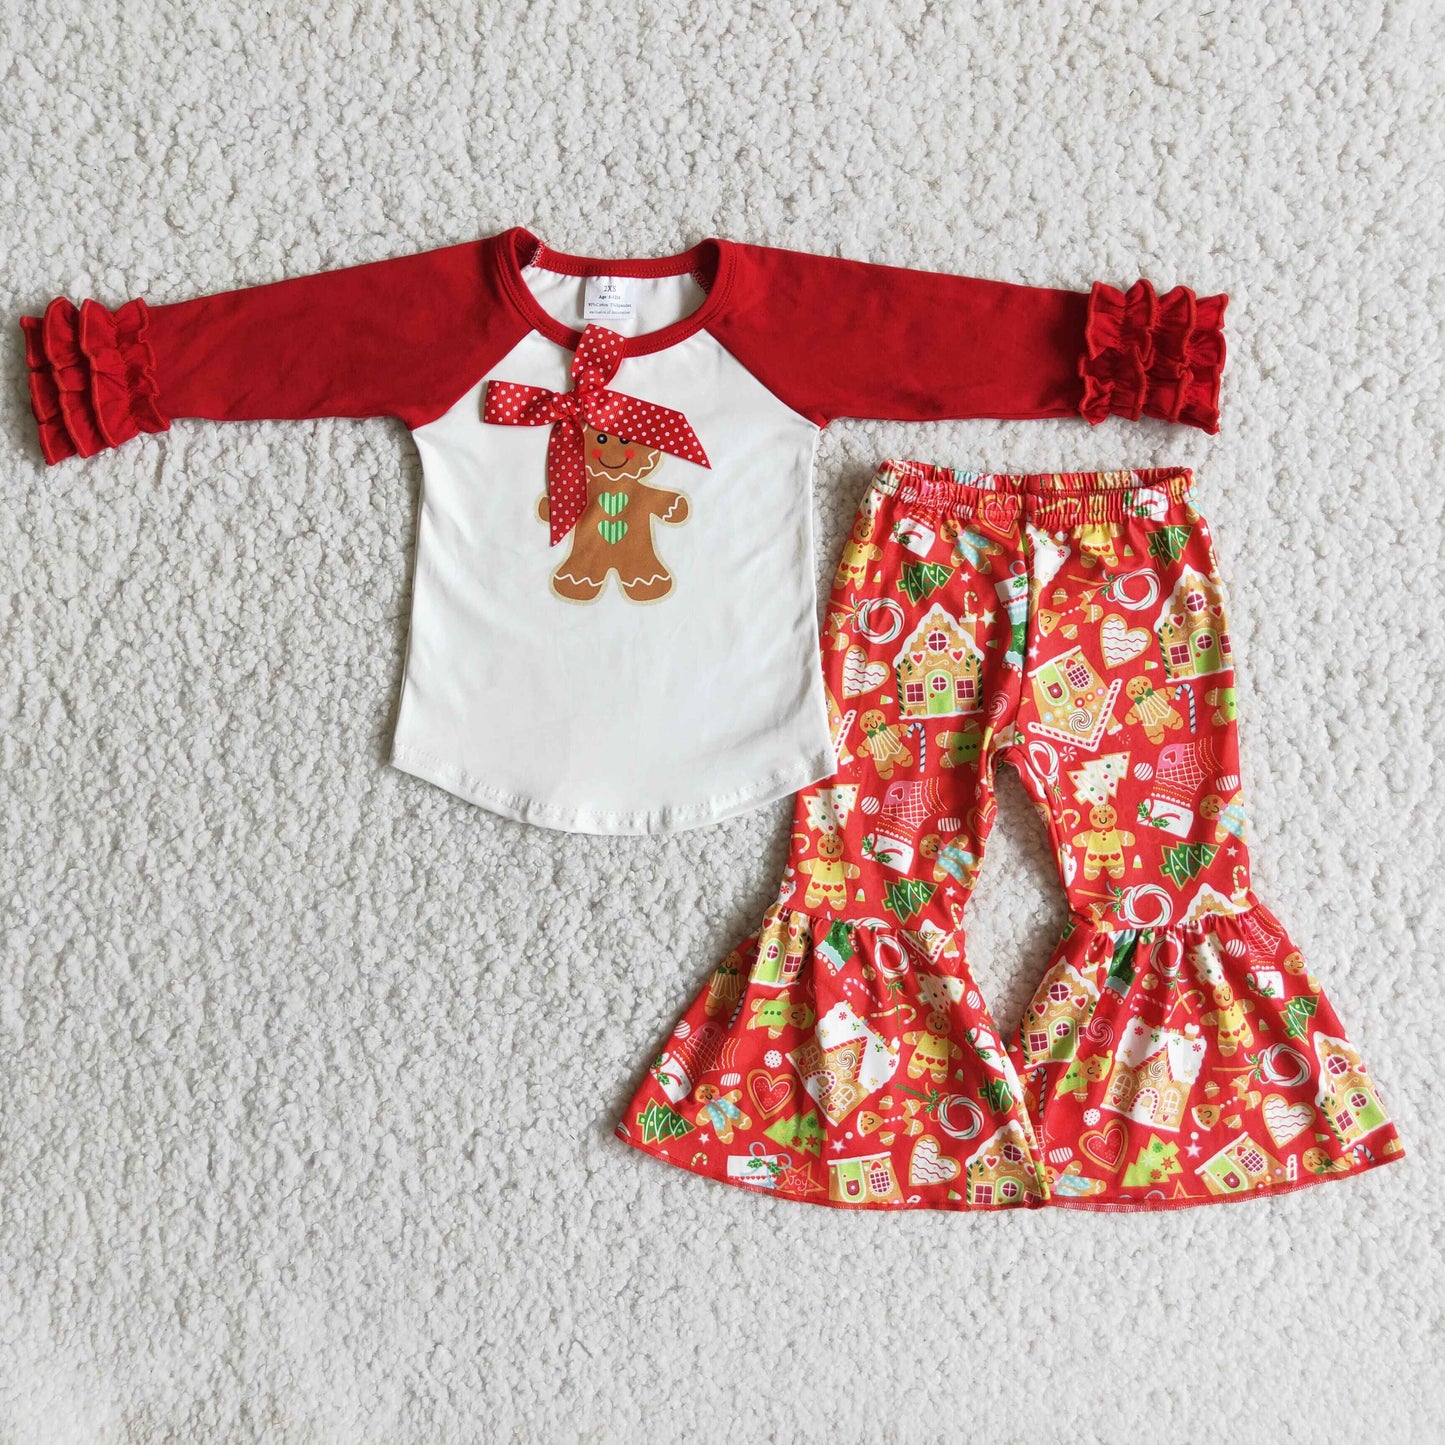 Toddle girls long sleeve Christmas clothes